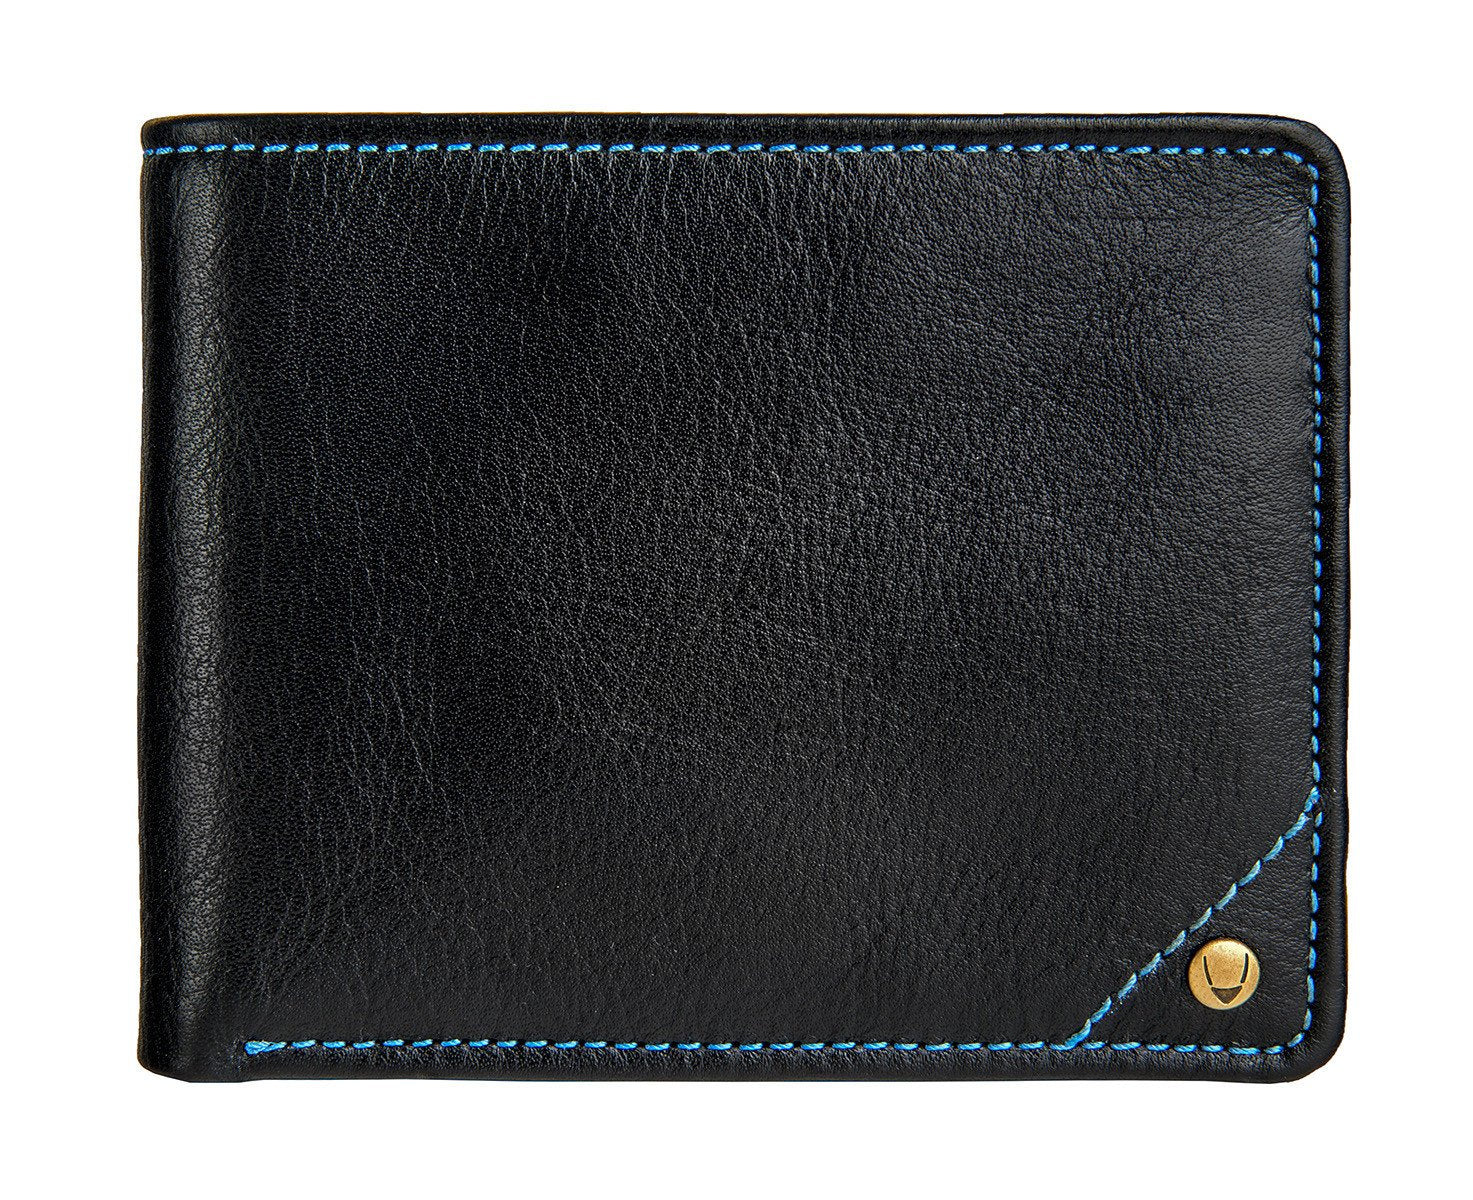 Angle Stitch RFID Blocking Multi-Compartment Leather Wallet